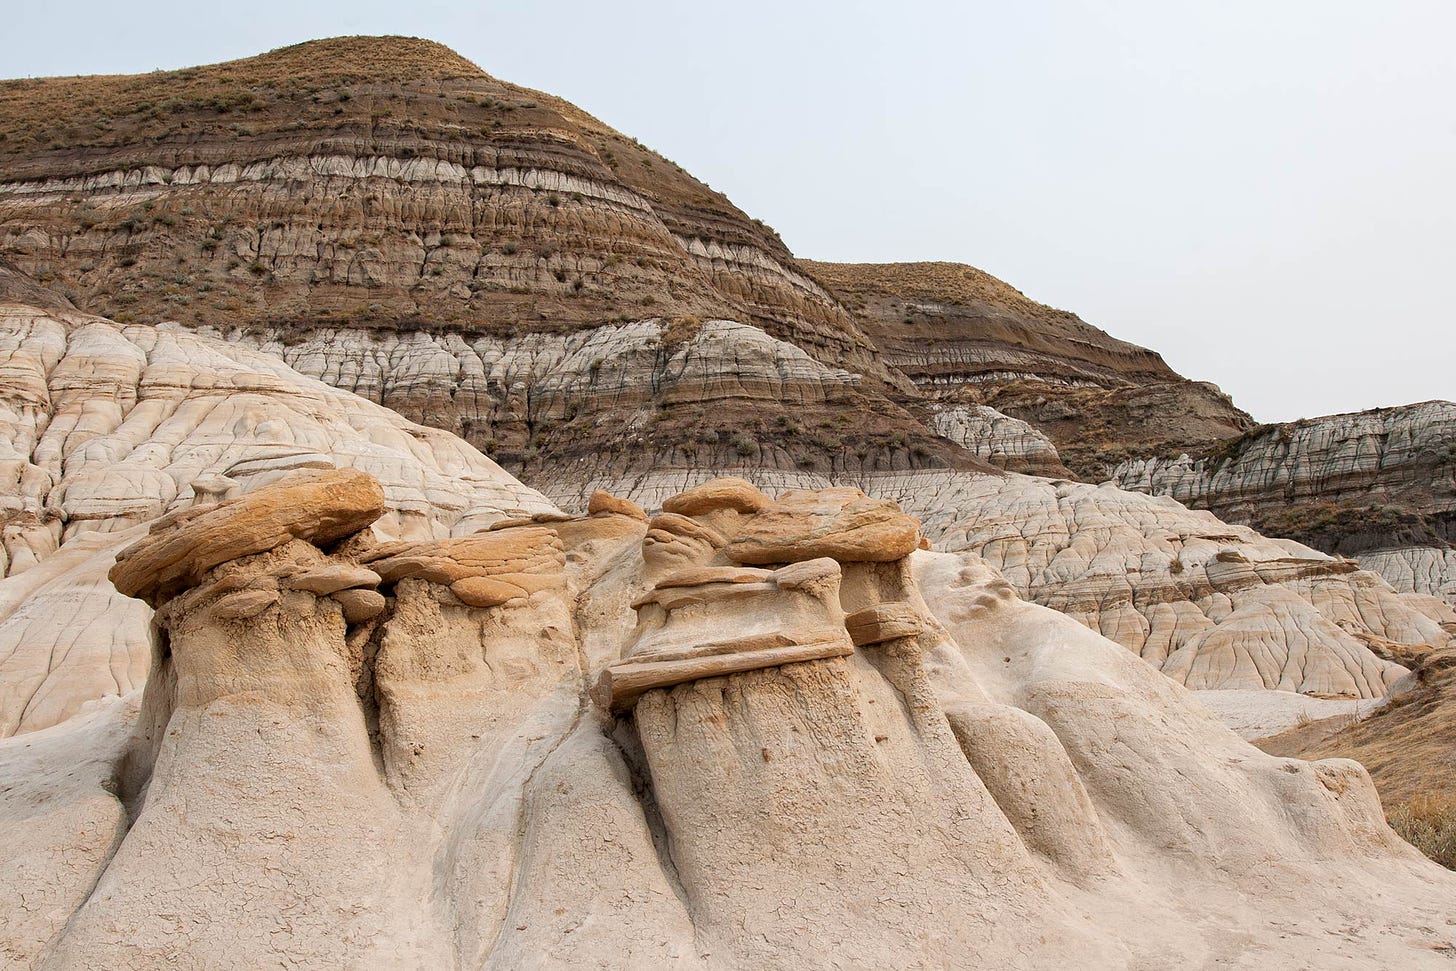 orange-topped hoodoos with crackling earth in front of a striped badlands hillside studded with scraggly brush